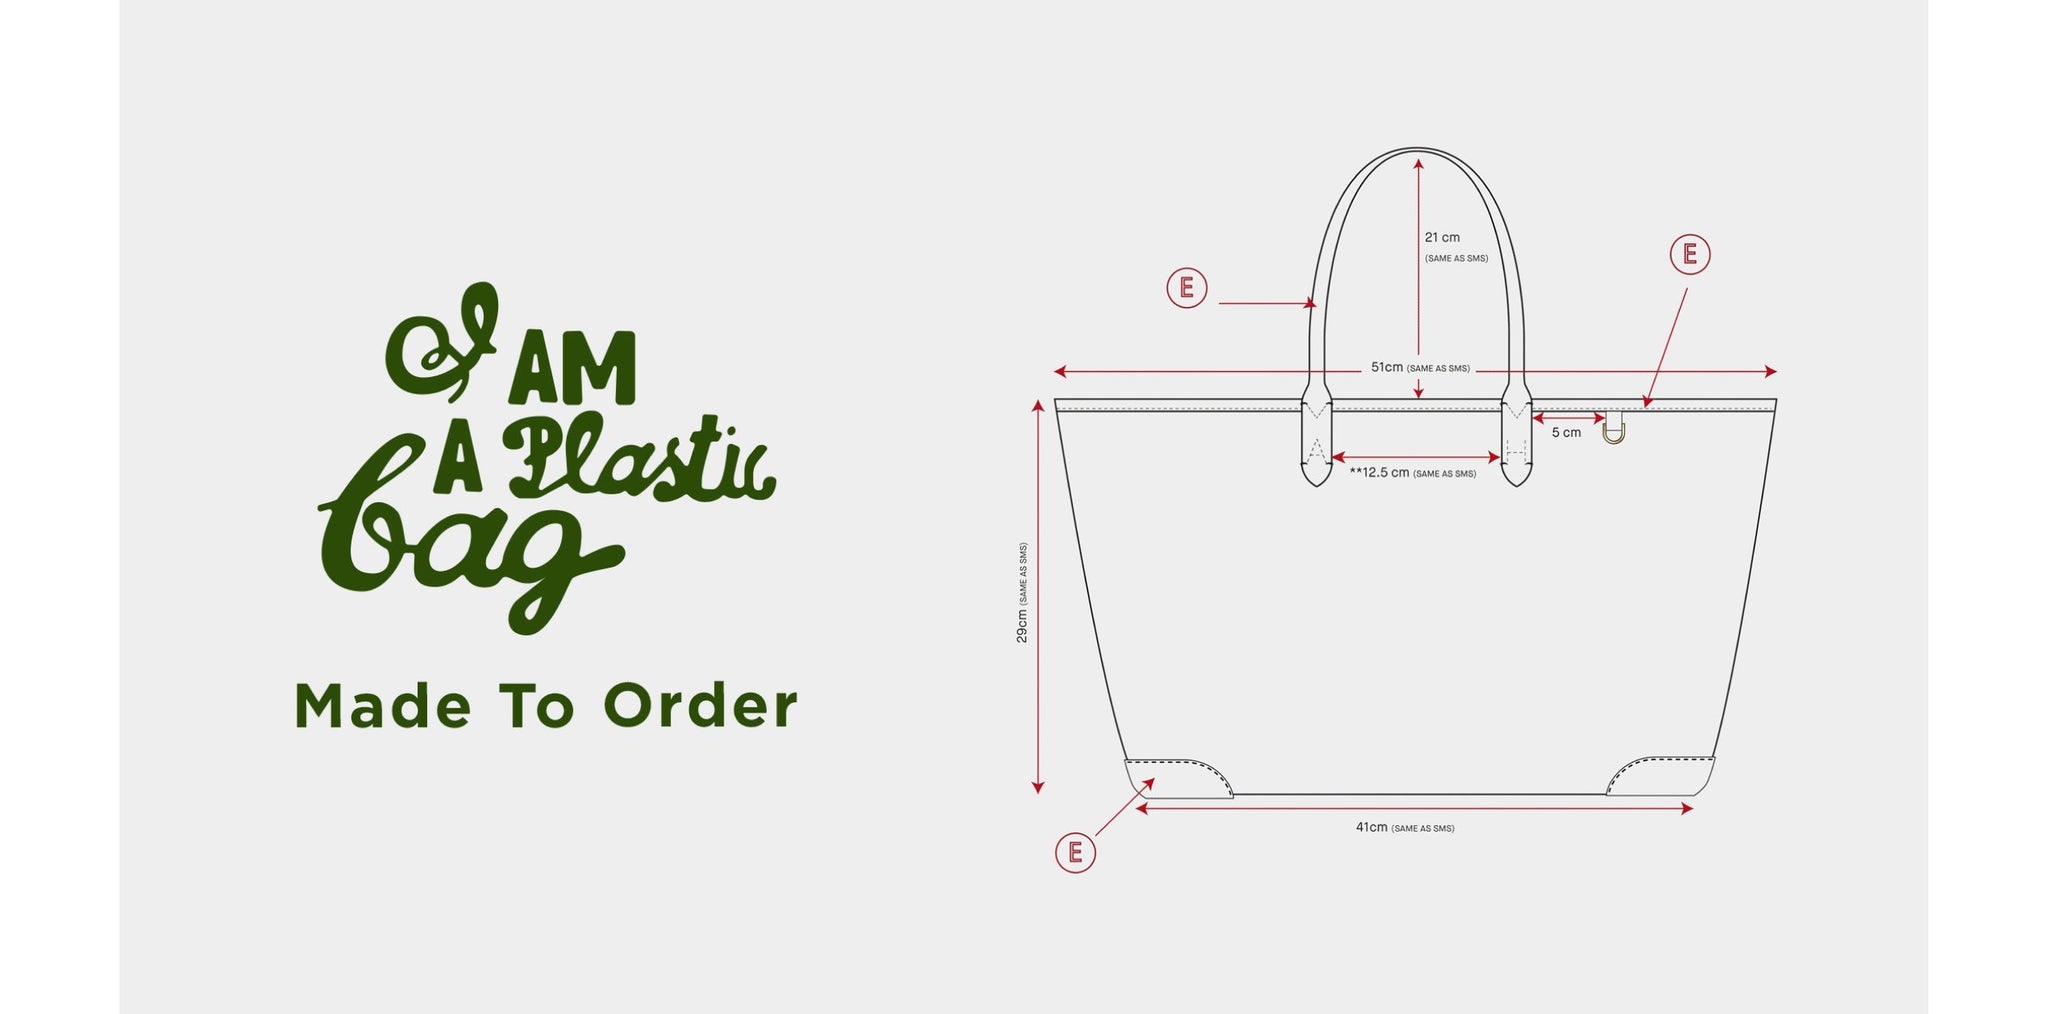 I Am a Plastic Bag' is made from recycled single-use plastic bottles